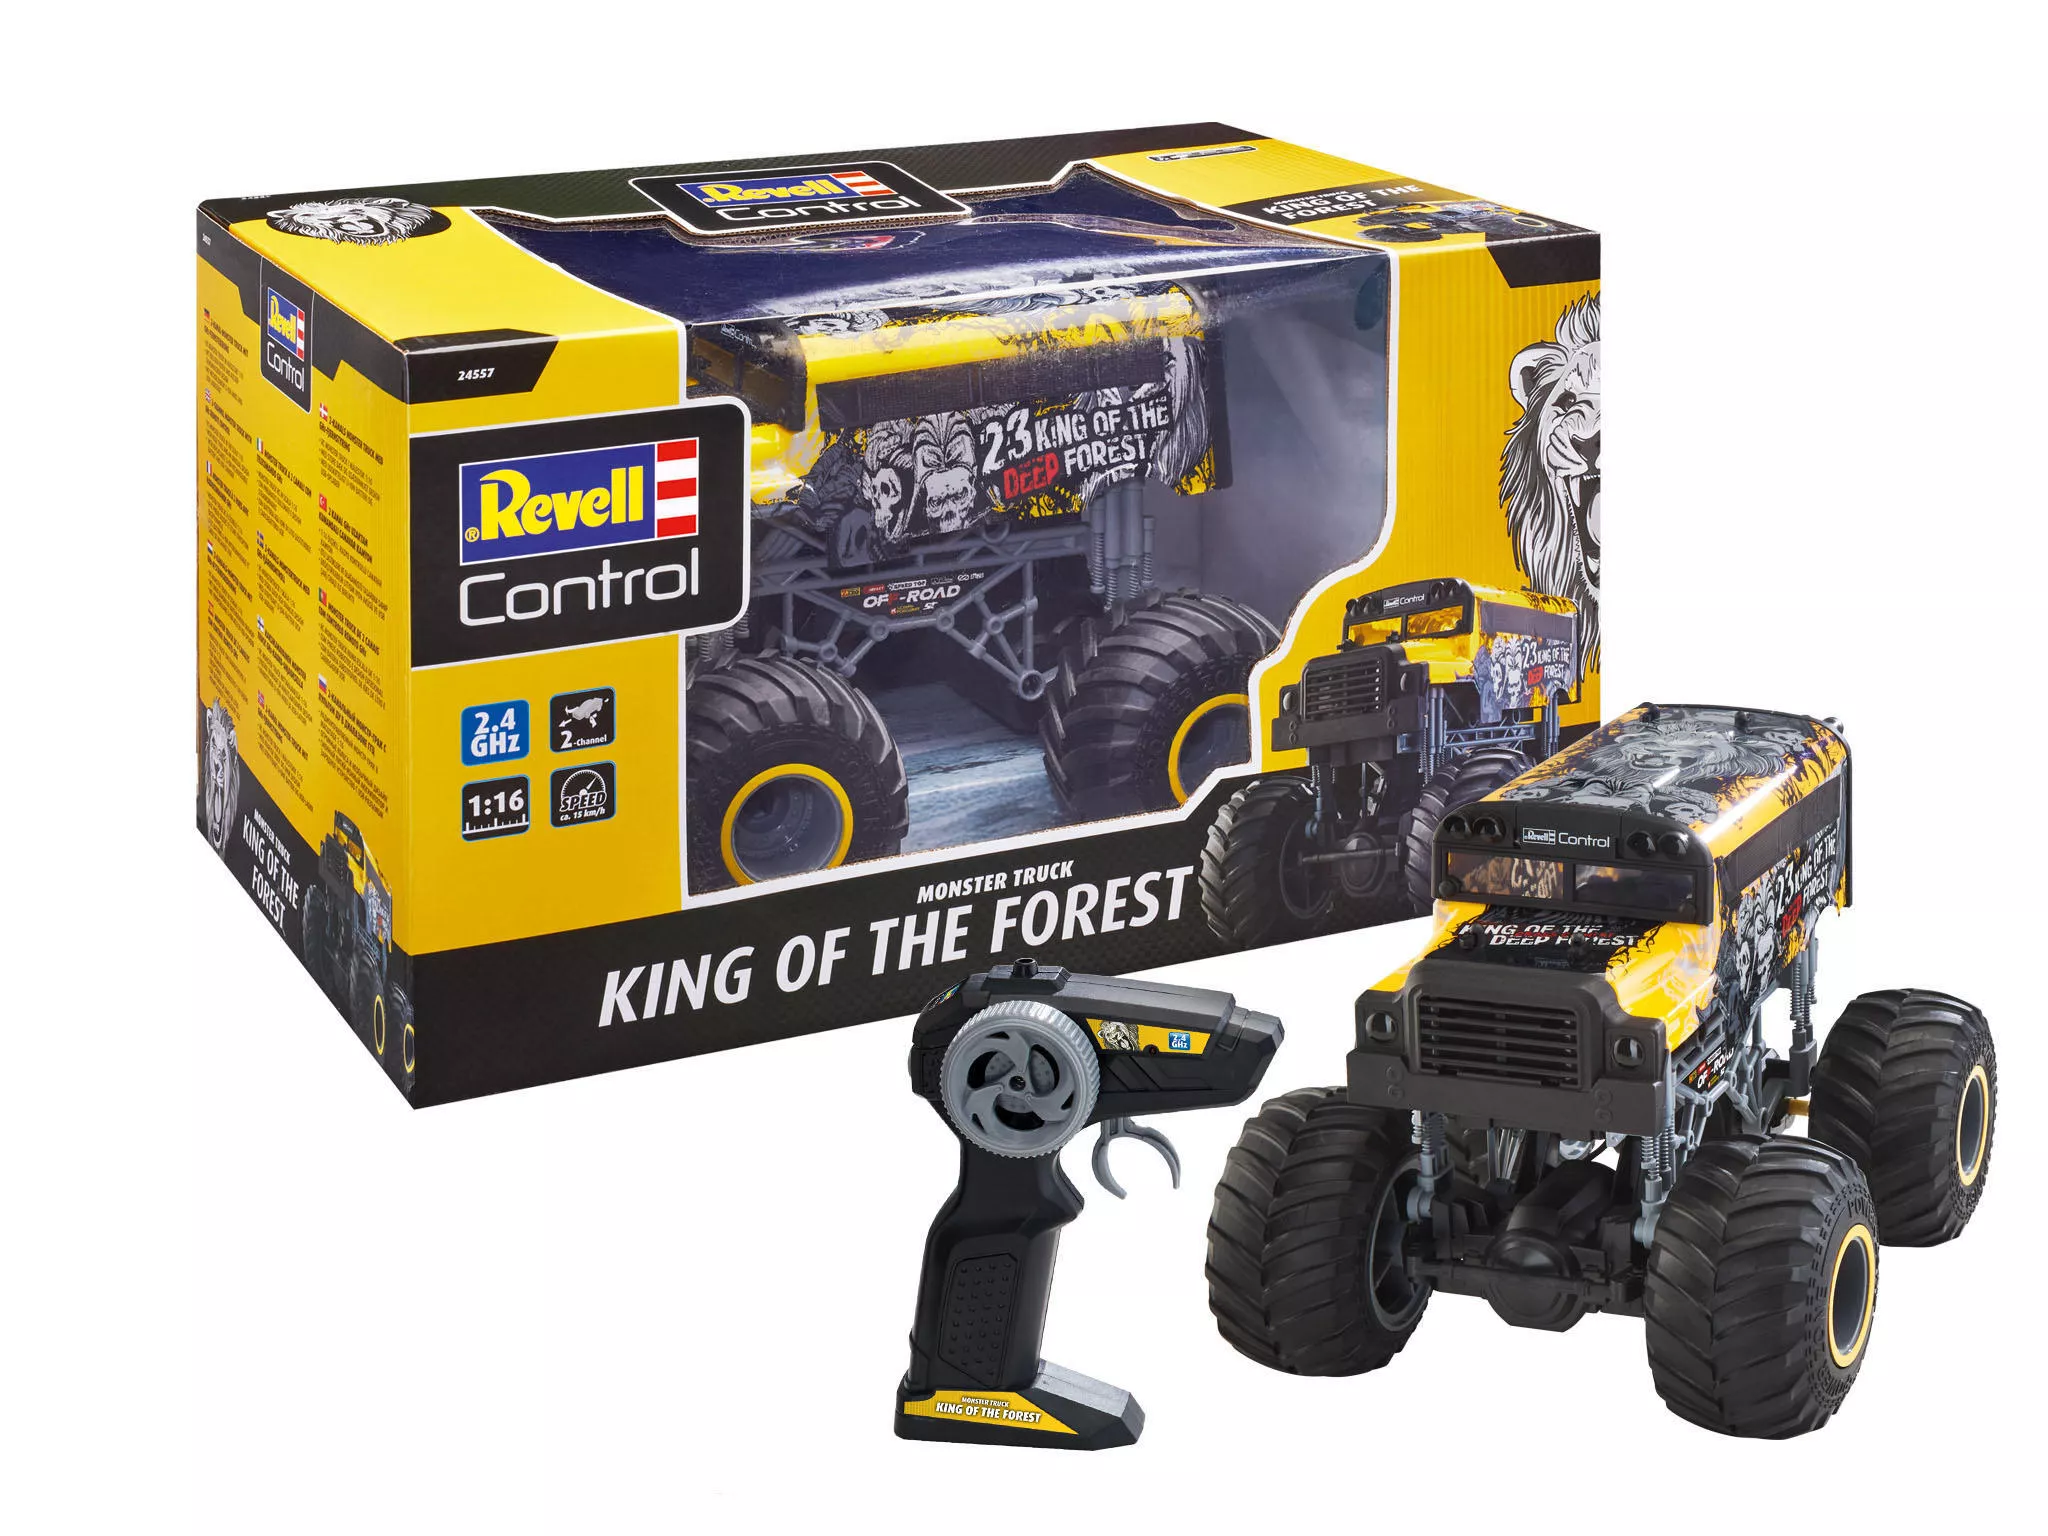 Revell 24557 RC Monster Truck "King of the forest" Revell Control Ferngesteuertes Auto